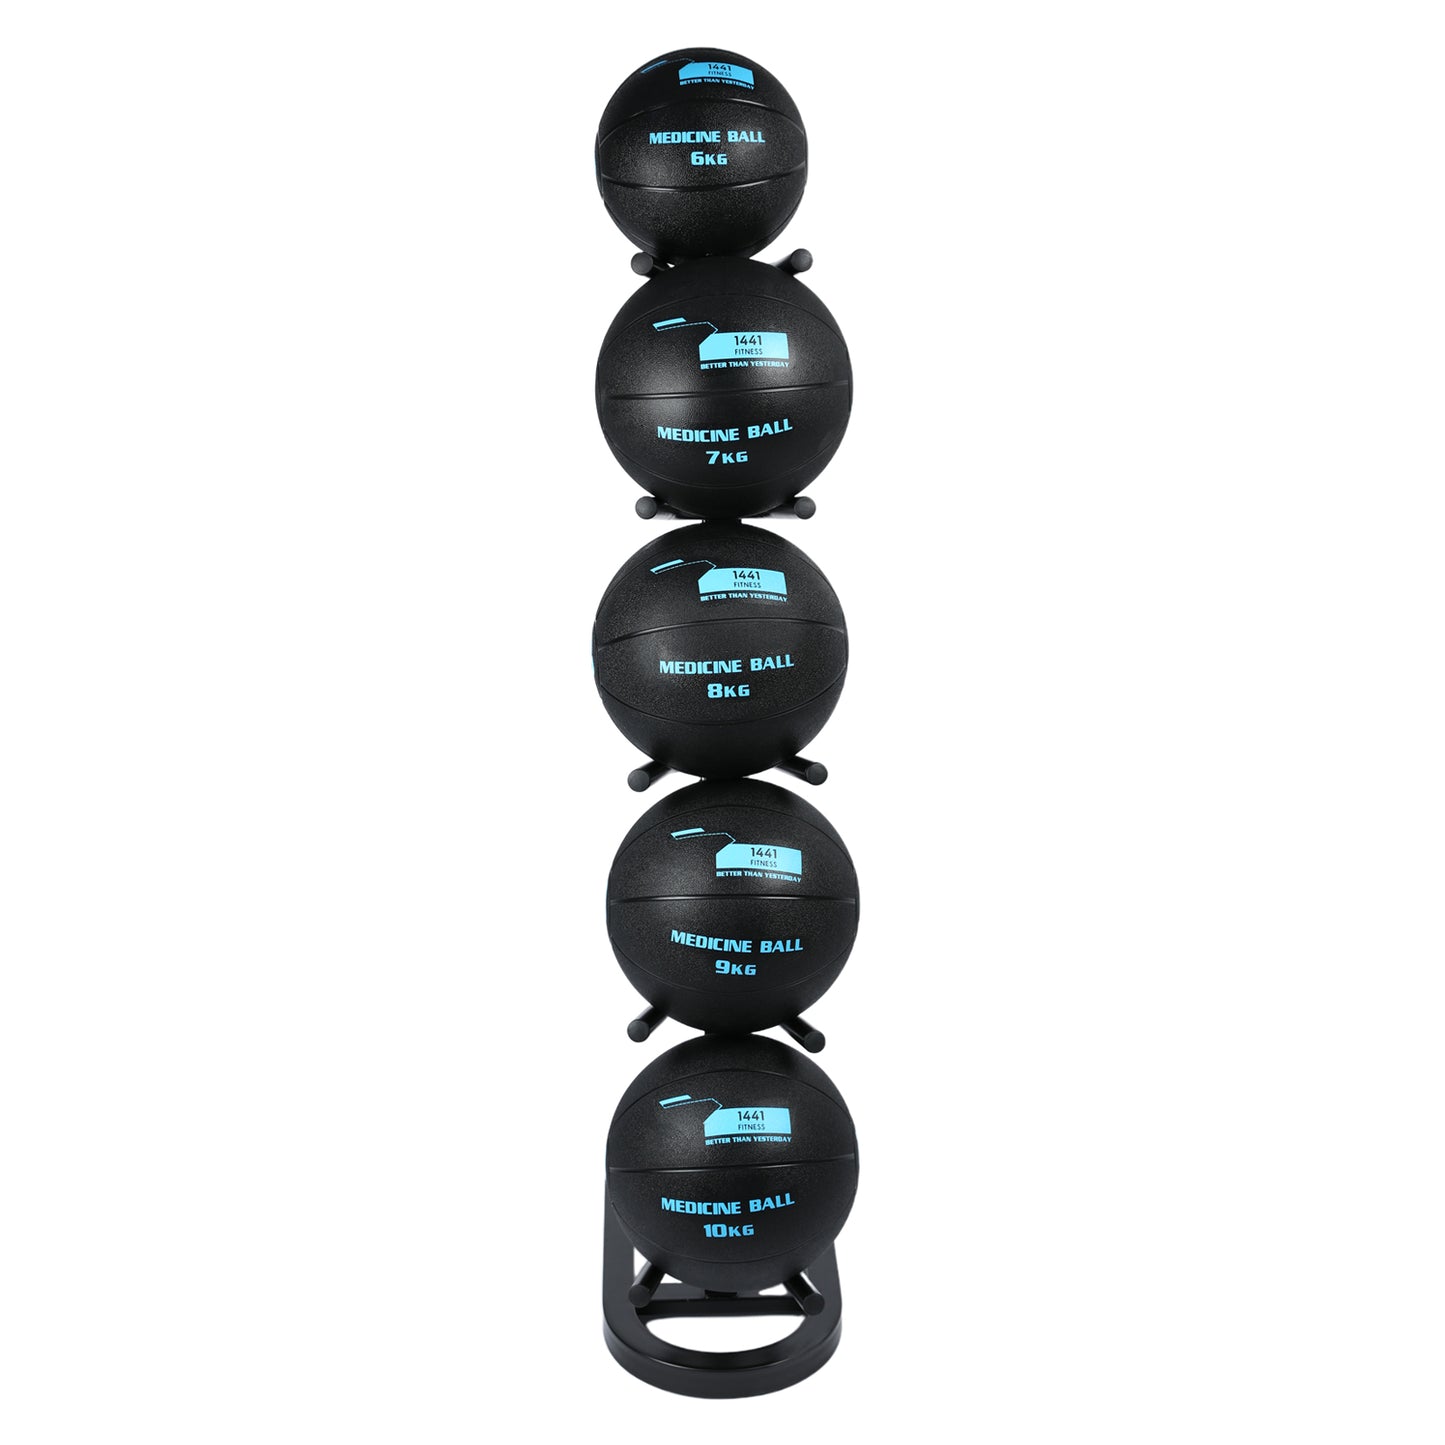 1441 Fitness Medicine Ball Combo Set - 6 KG to 10 KG with Ball Rack